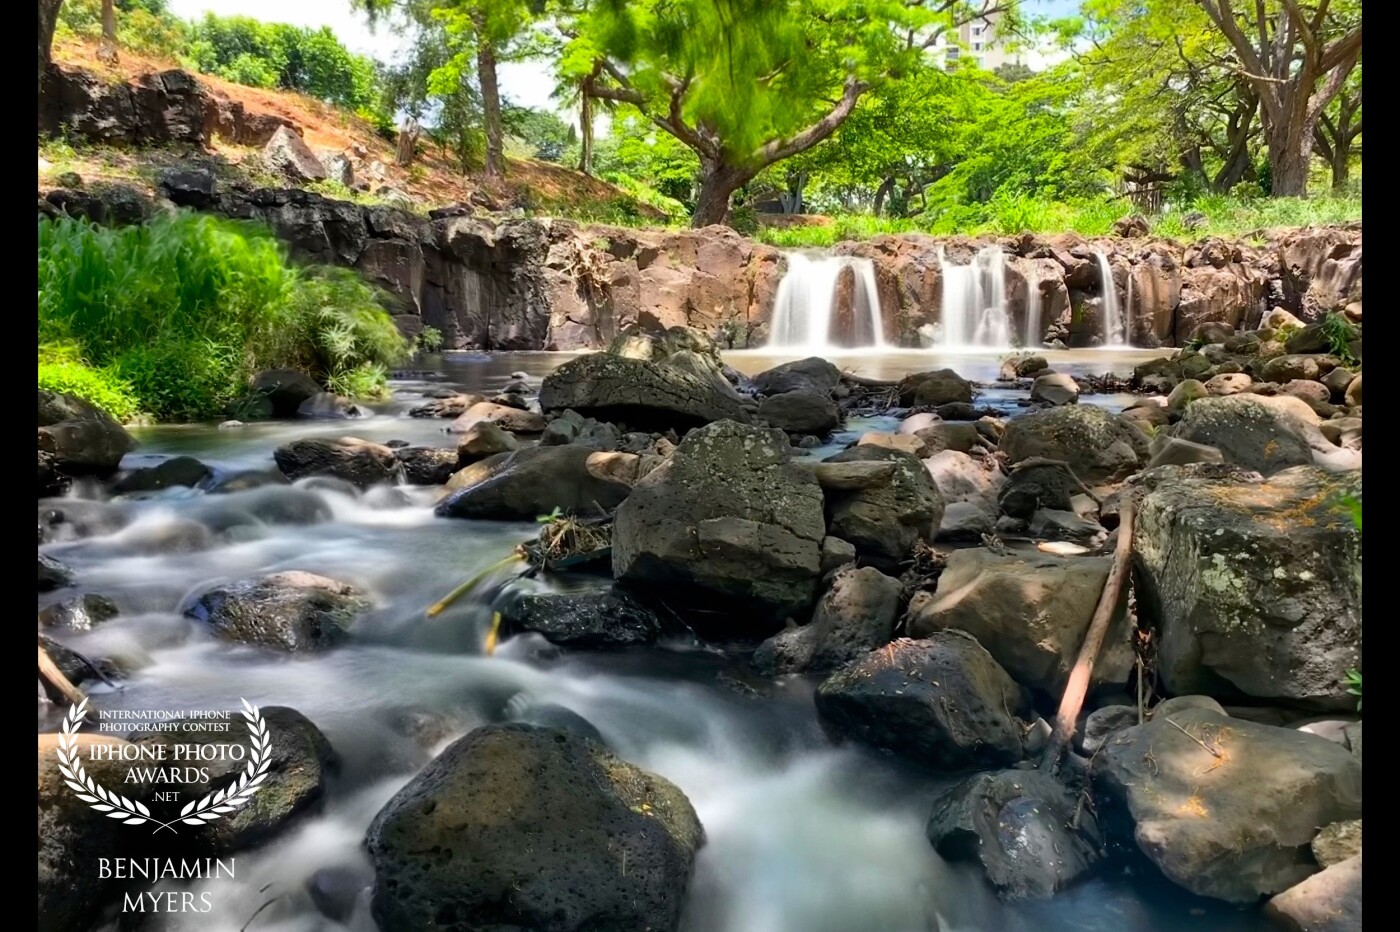 Lili’uokalani Botanical gardens are tucked away, not far from central Honolulu. It’s a beautiful area that sees little foot traffic and is underutilized.  There had been heavy rains recently, so I thought I’d check on the falls. I was not disappointed. 